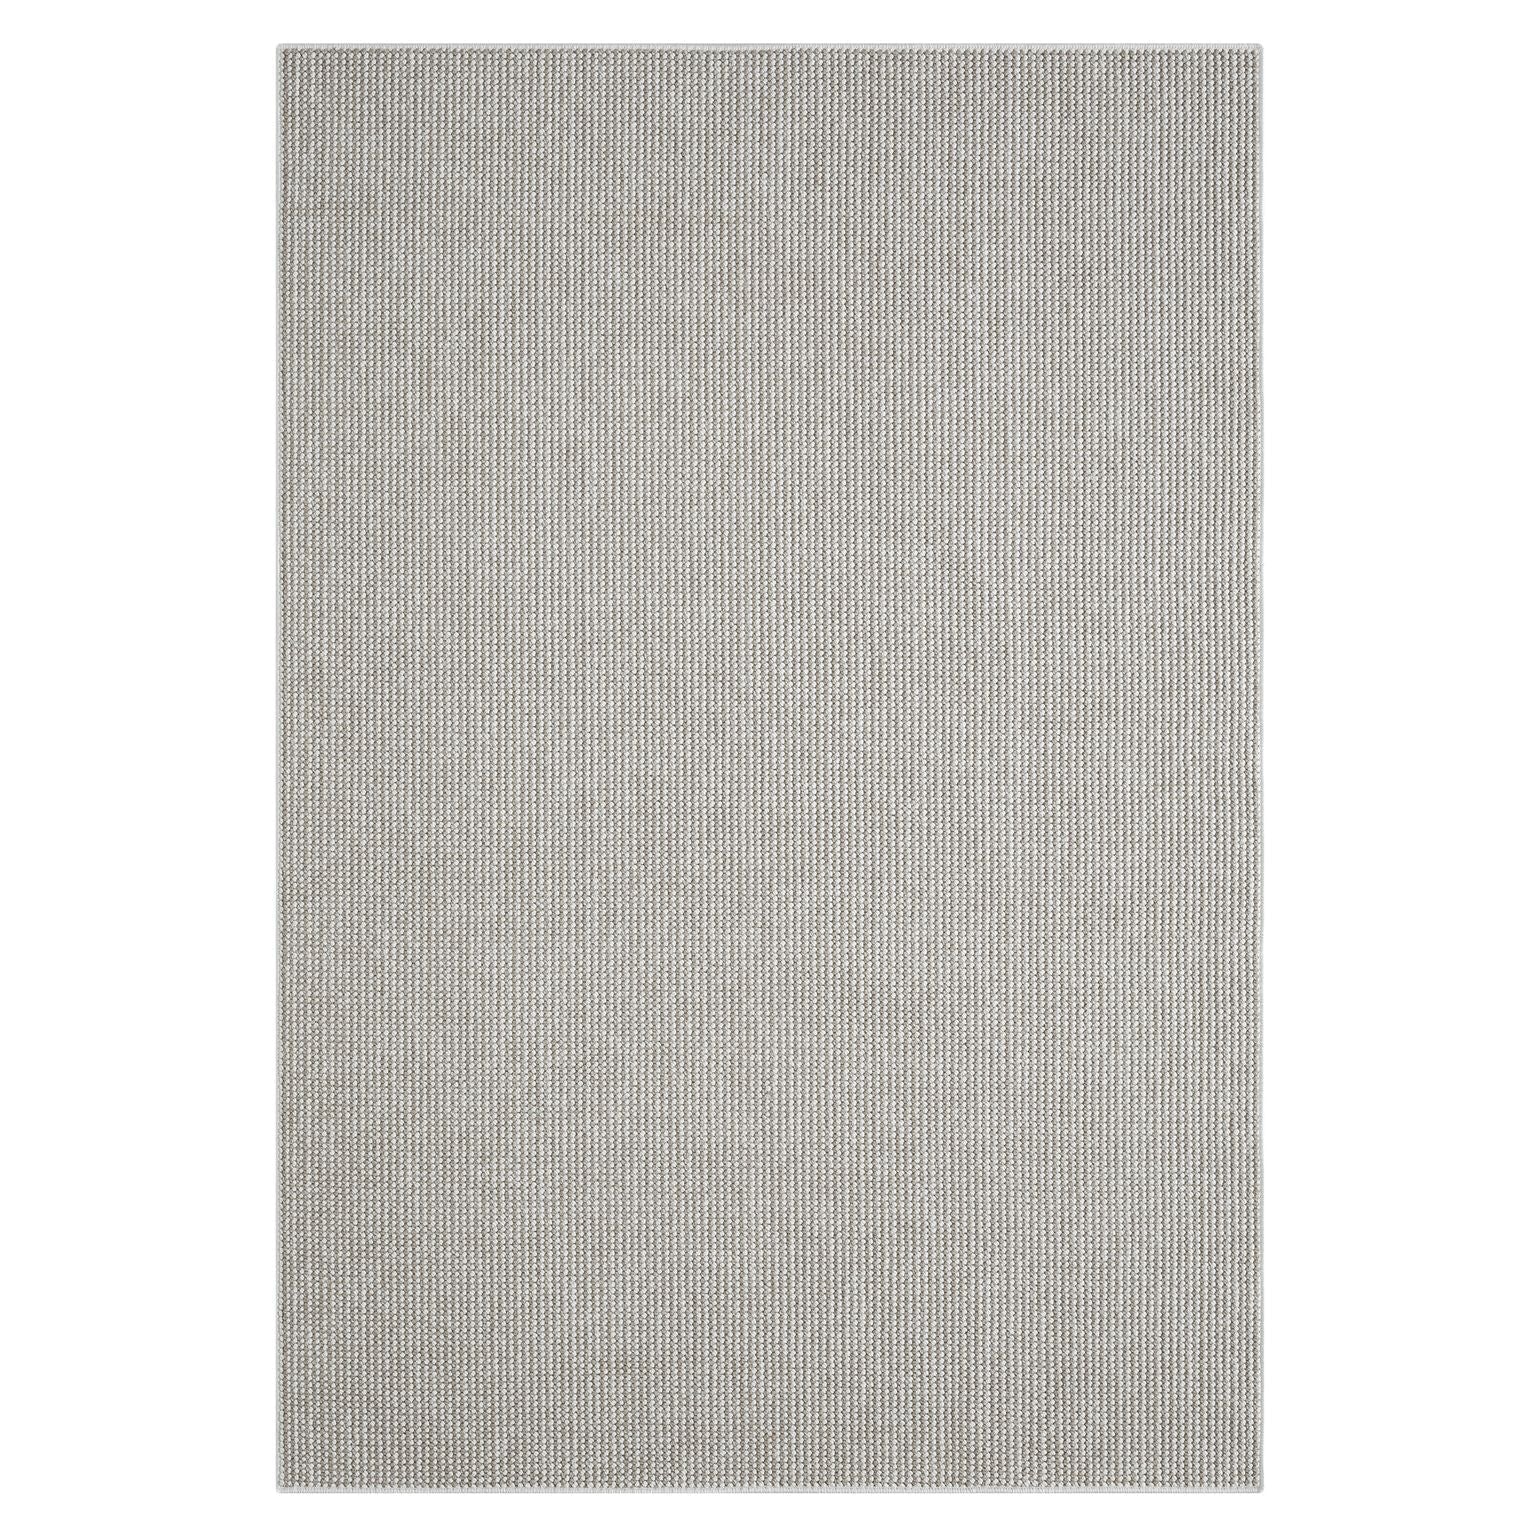 Solace 199 Sand Saray Rugs